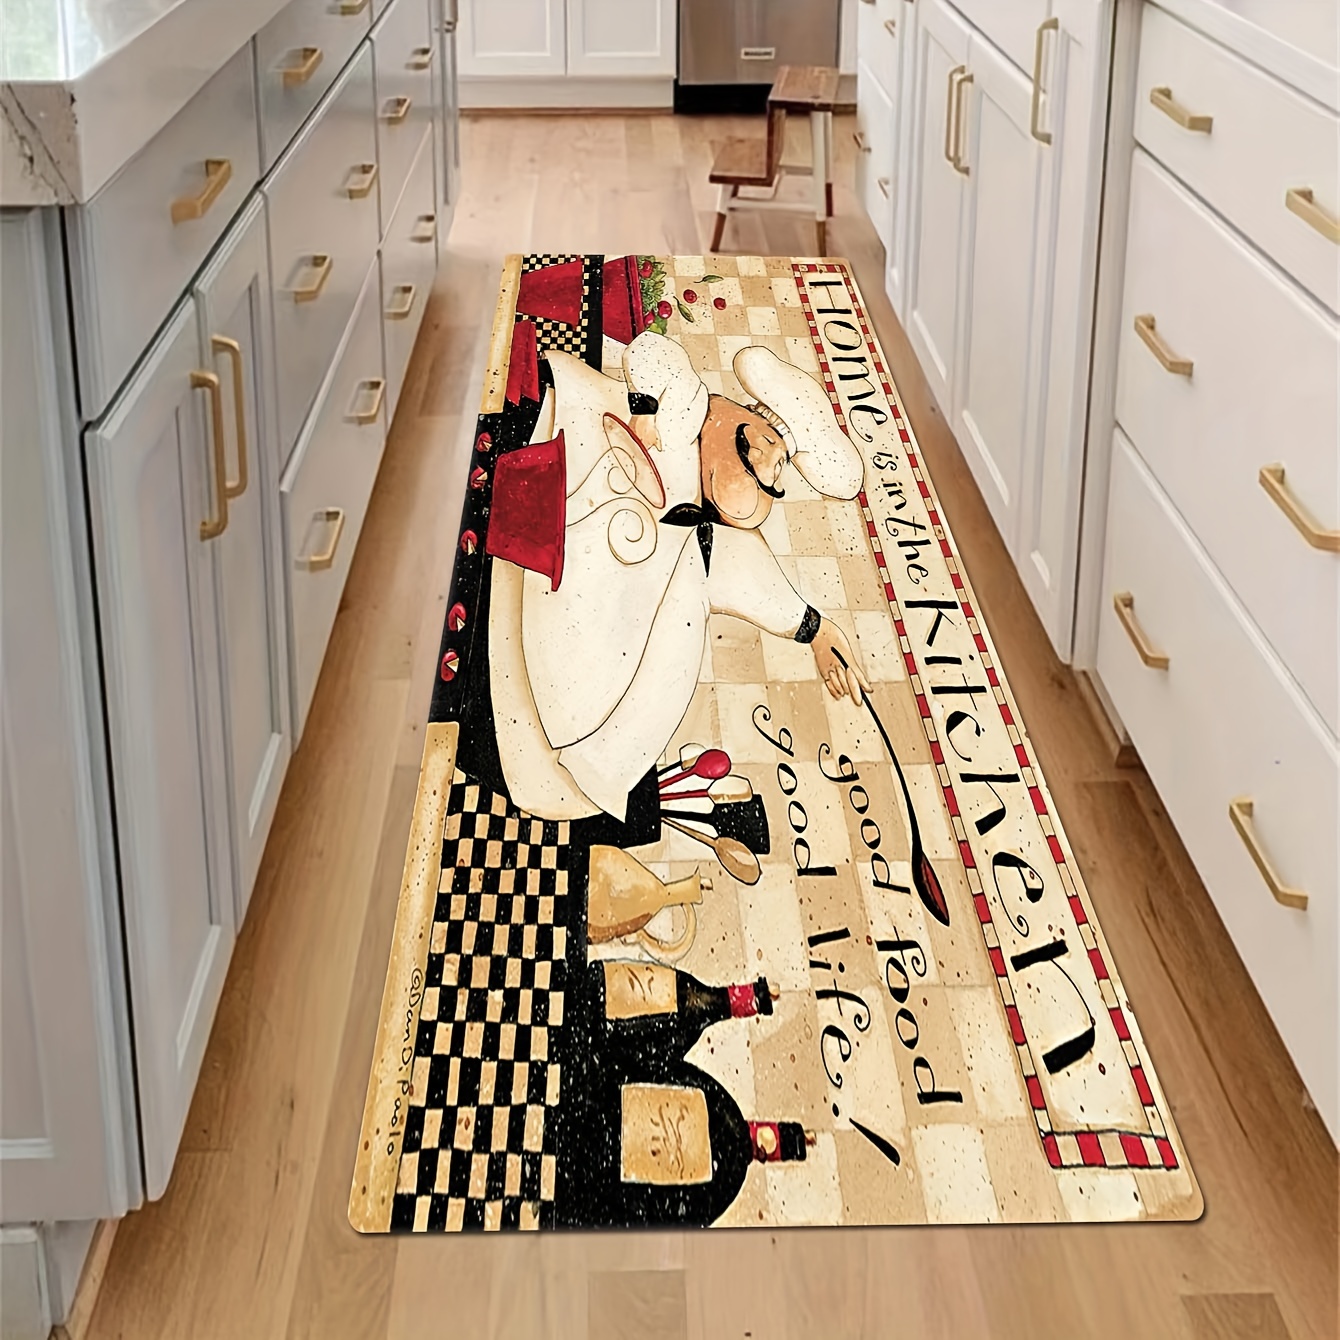 Kitchen Rug Runner, KIMODE Anti Fatigue Cushioned Kitchen Rugs and